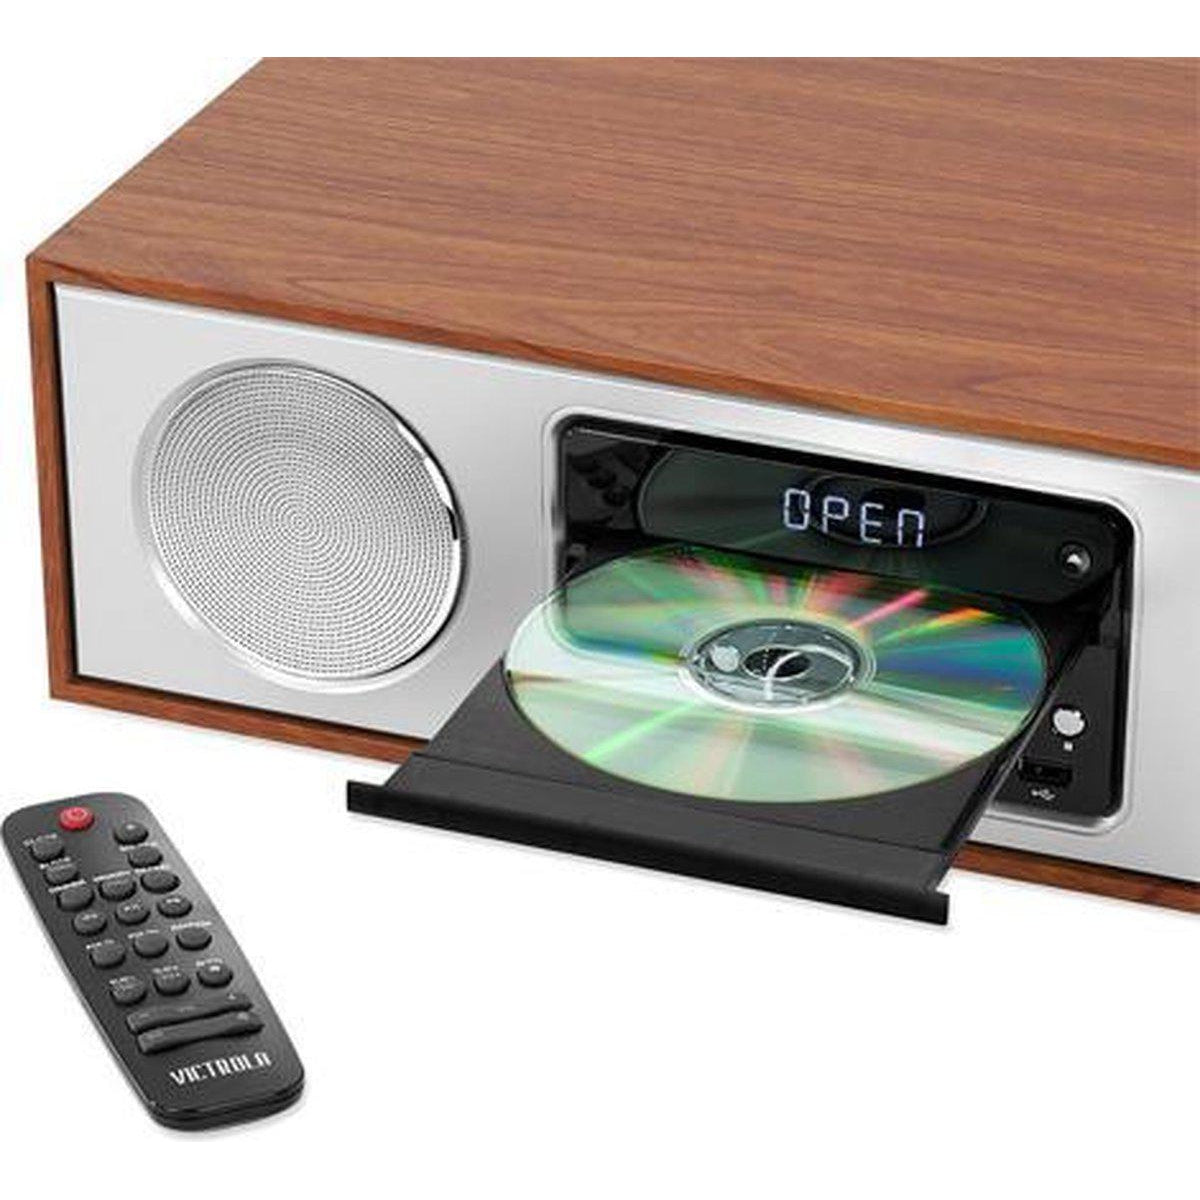 Victrola Bluetooth Microsystem Personal CD Player - Wood